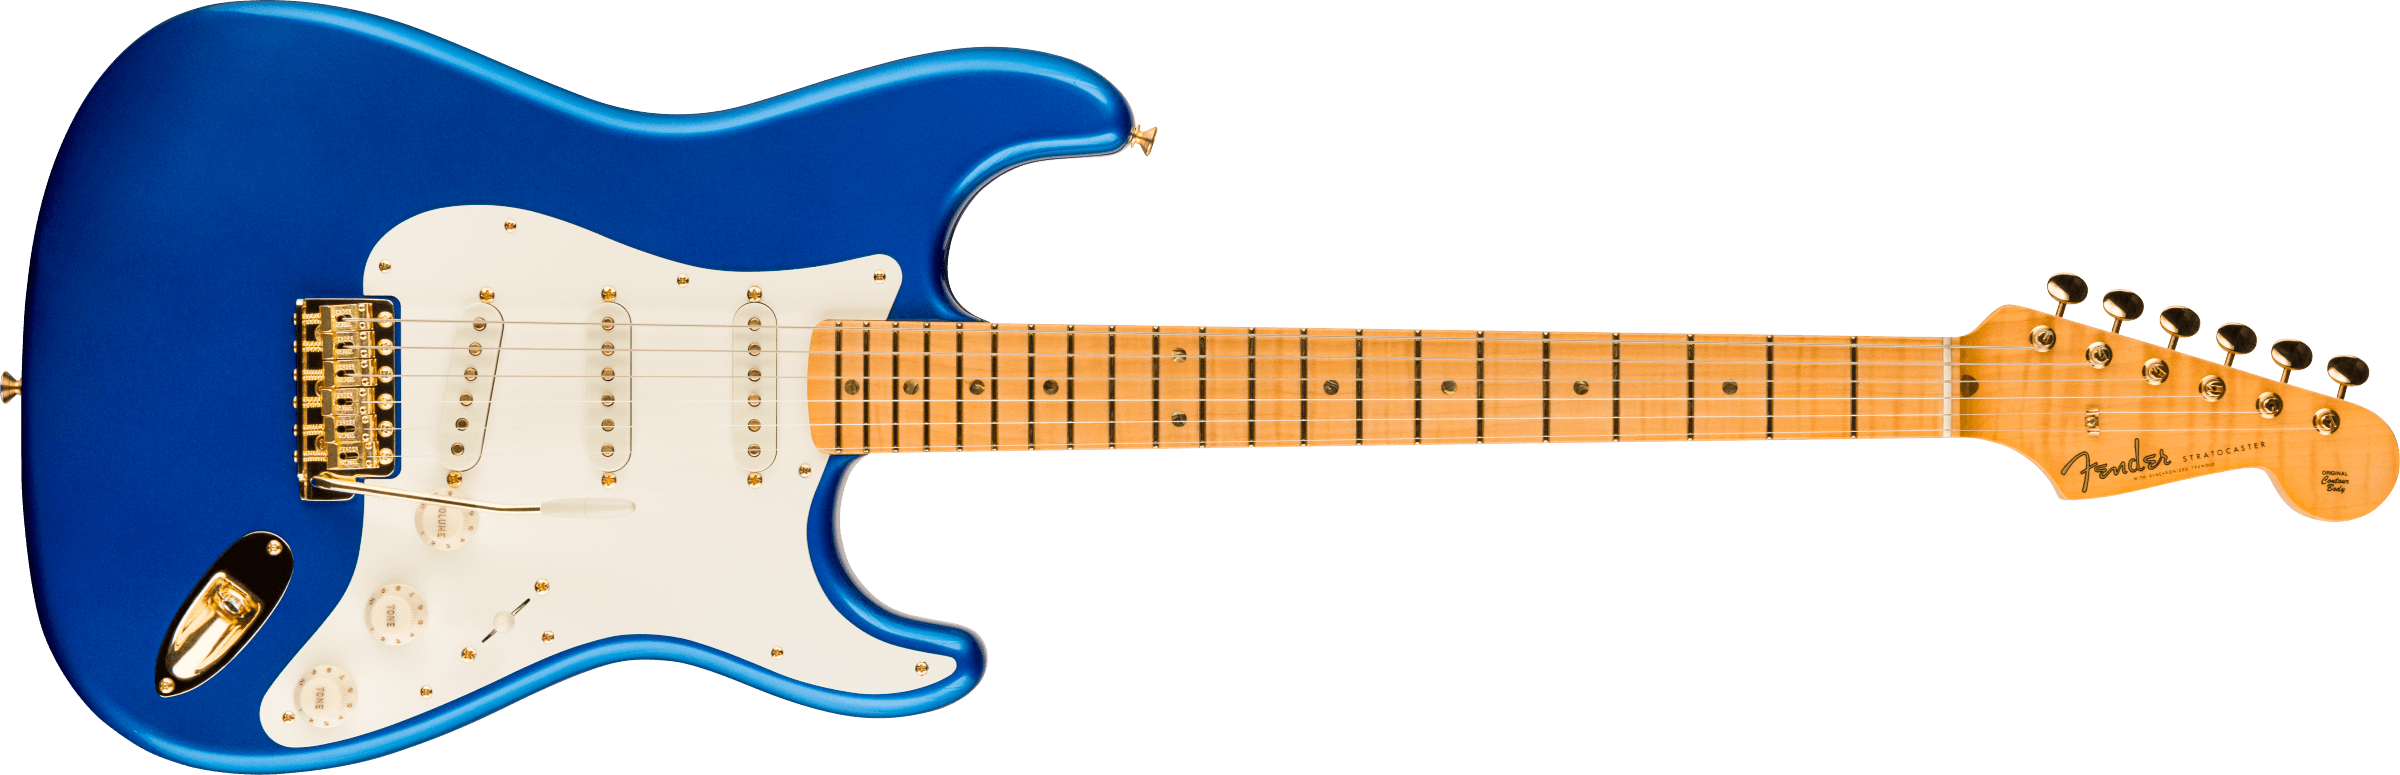 Fender Custom shop Limited Edition 70th Anniversary Stratocaster NOS, 1-Piece 4A Flame Maple Fingerboard, Aged Bright Sapphire Metallic 9236091139